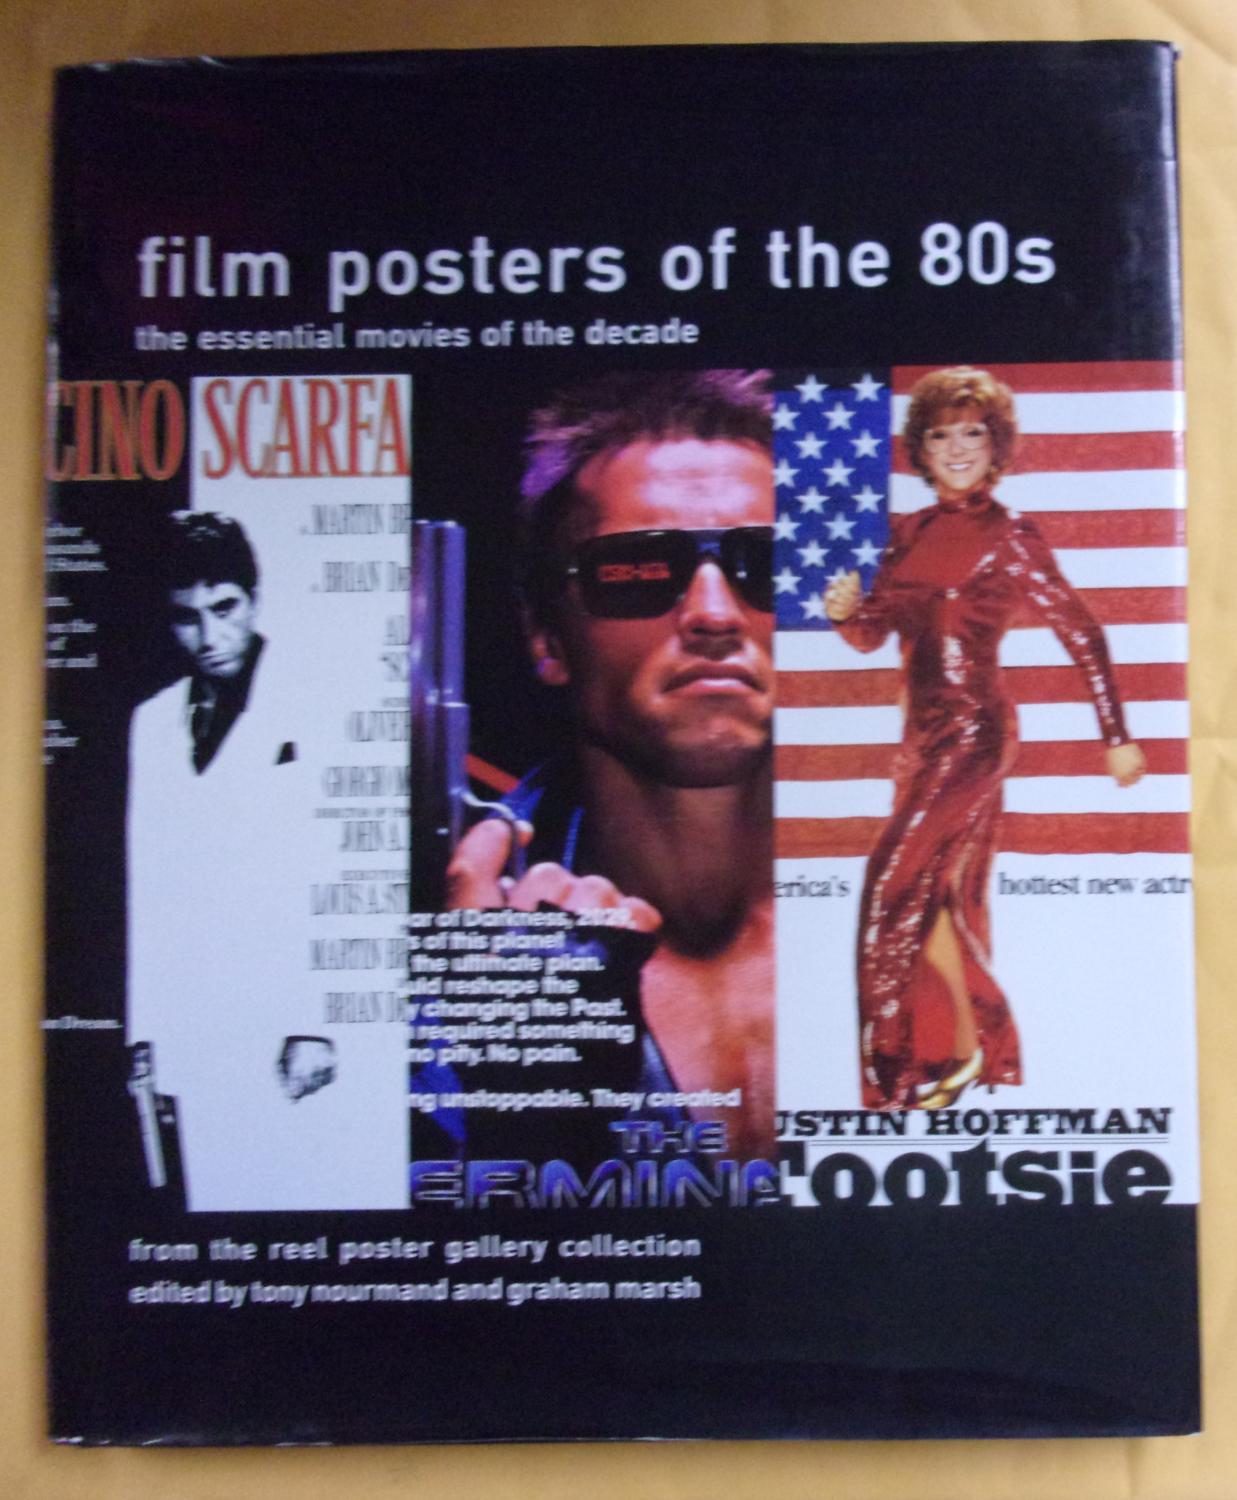 Film Posters of the 80s: The Essential Movies of the Decade, from the Reel Poster Gallery Collection - Nourmand, Tony & Graham Marsh (Editors)